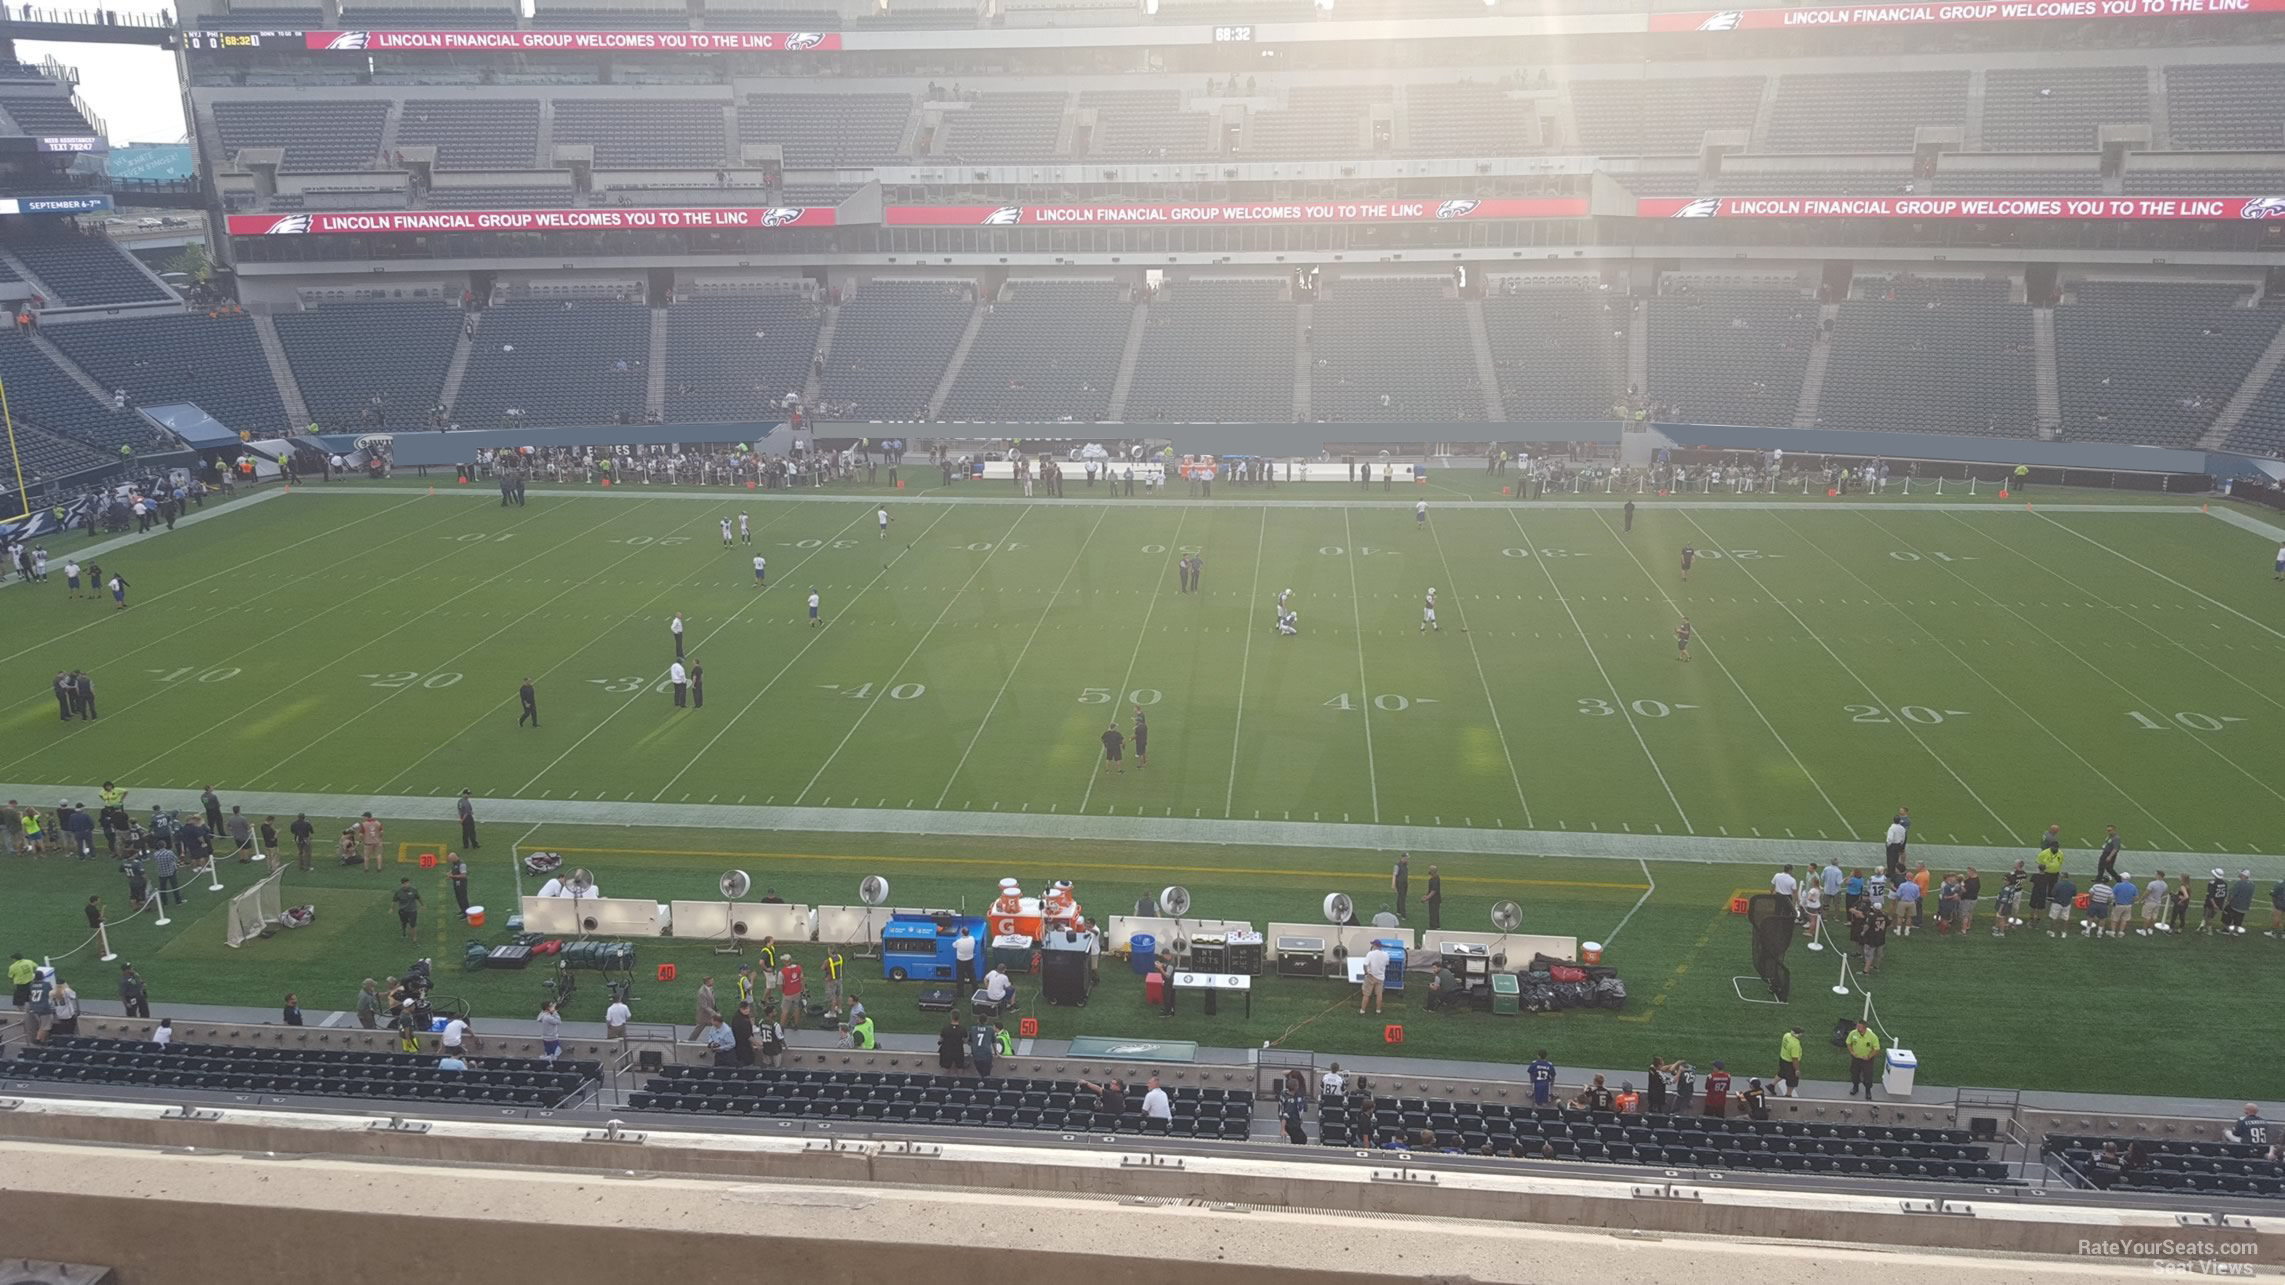 section c22, row 7 seat view  for football - lincoln financial field